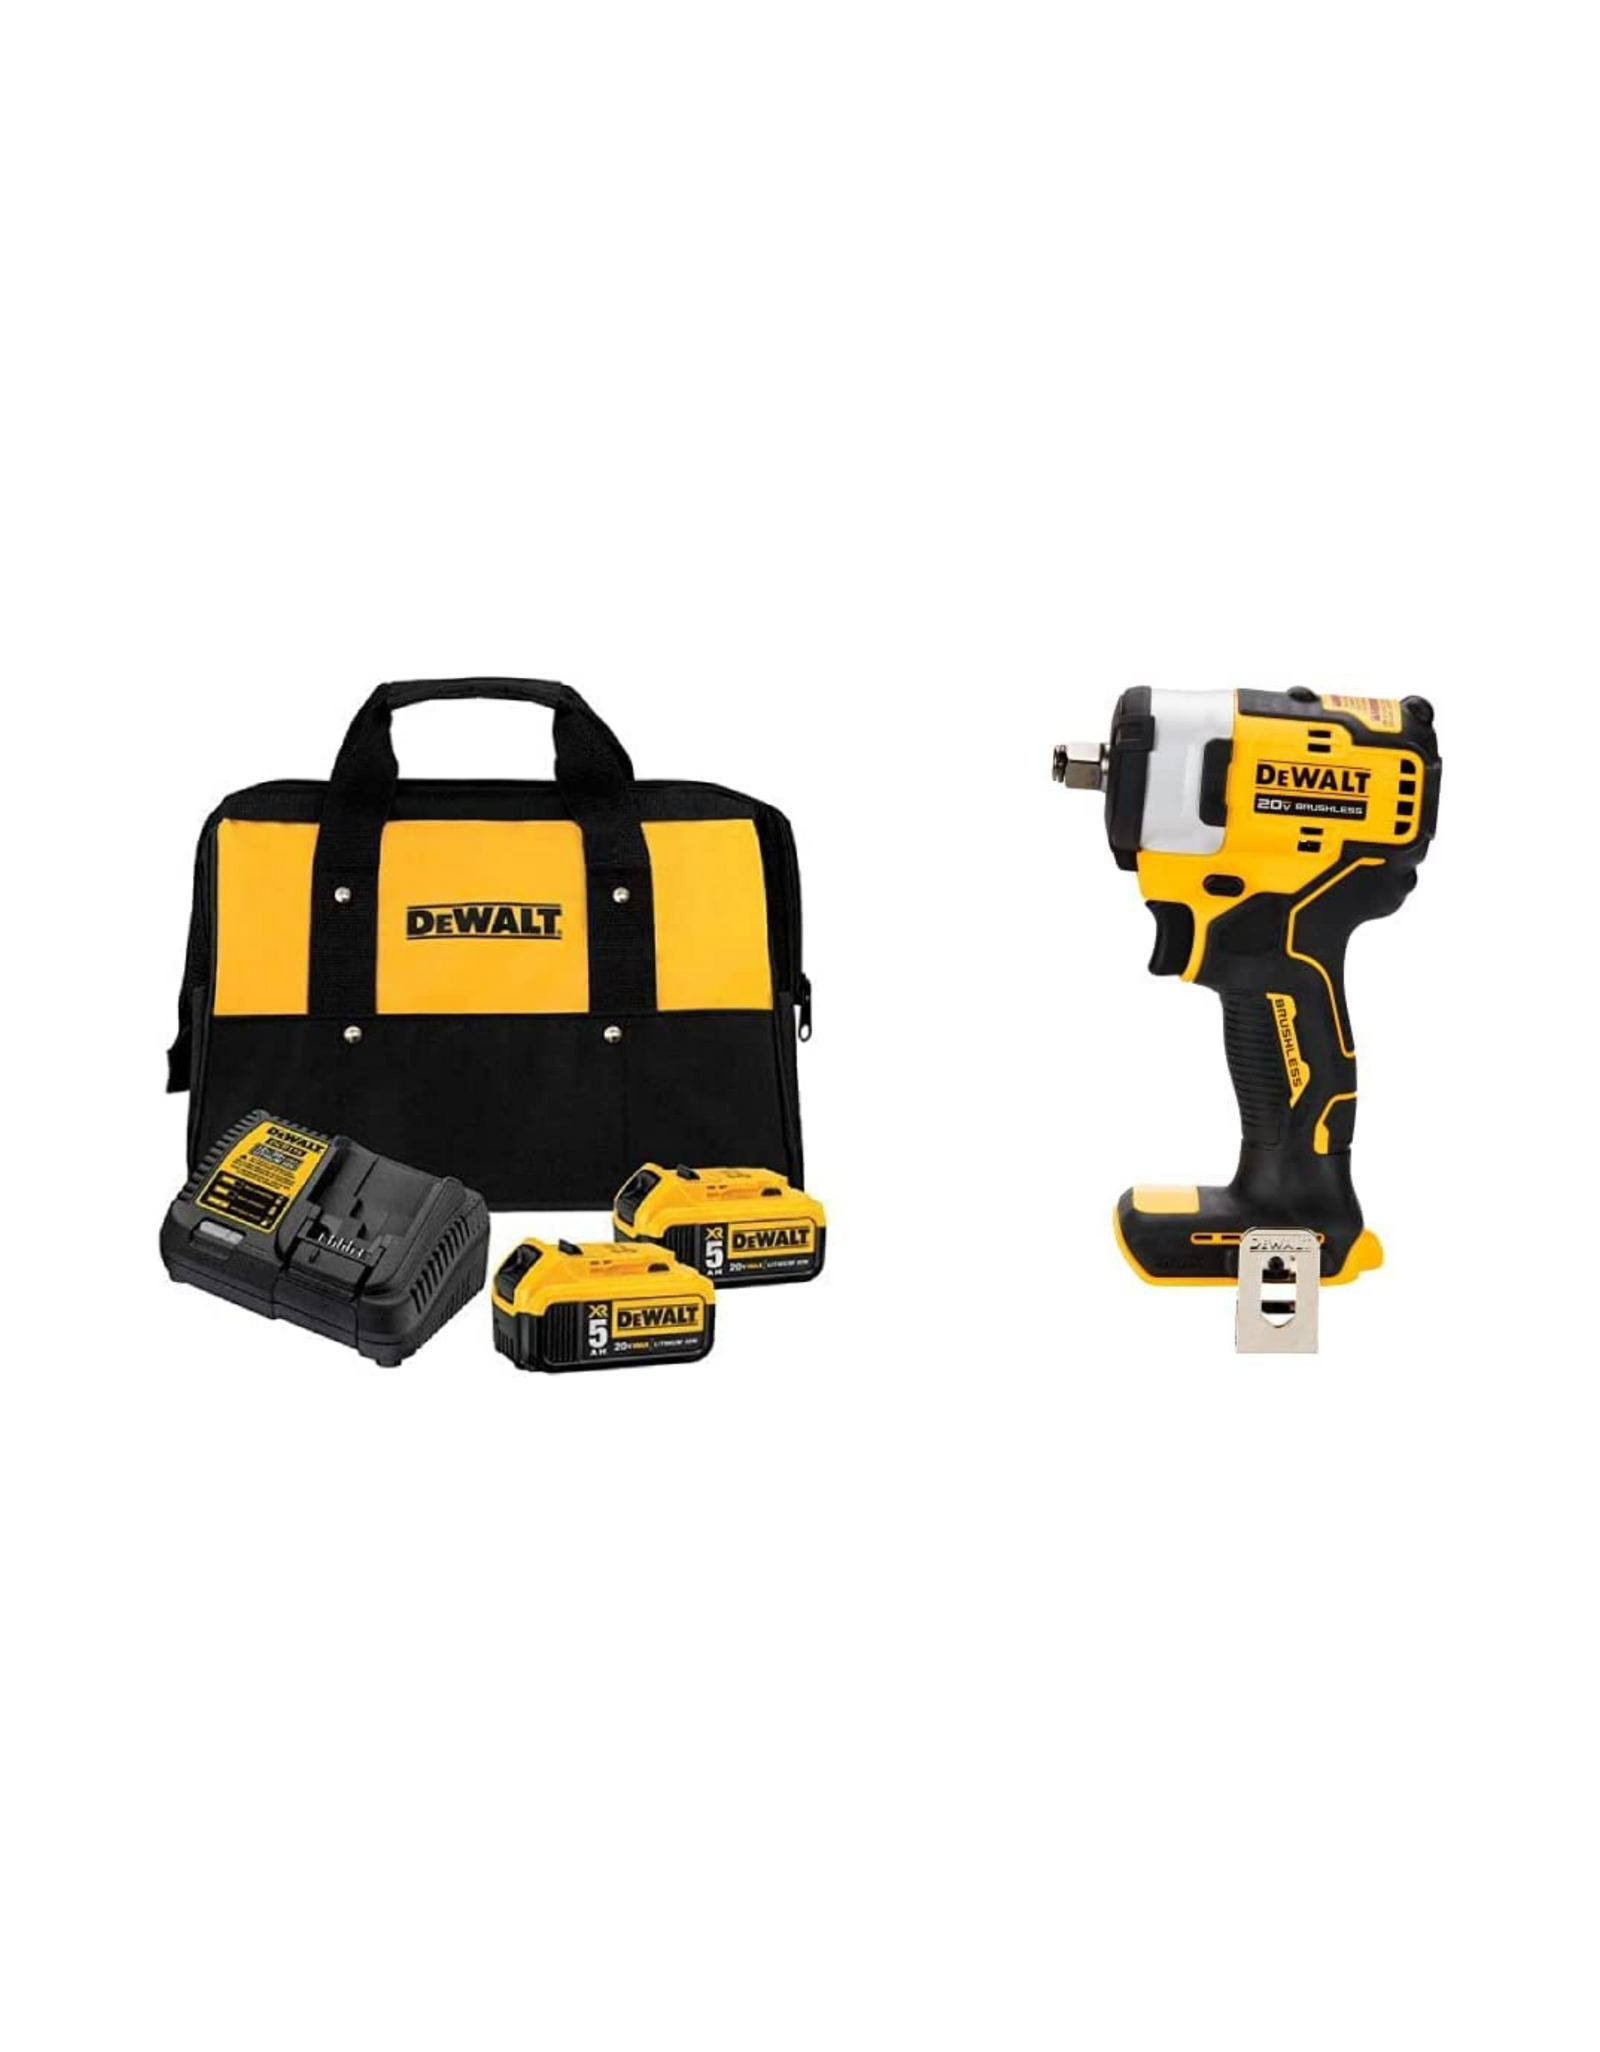 DEWALT DCB205-2CK 20V Max 5.0Ah Starter Kit with 2 Lithium Ion Batteries and DCF911B 20V MAX* 1/2" Impact Wrench with Hog Ring Anvil